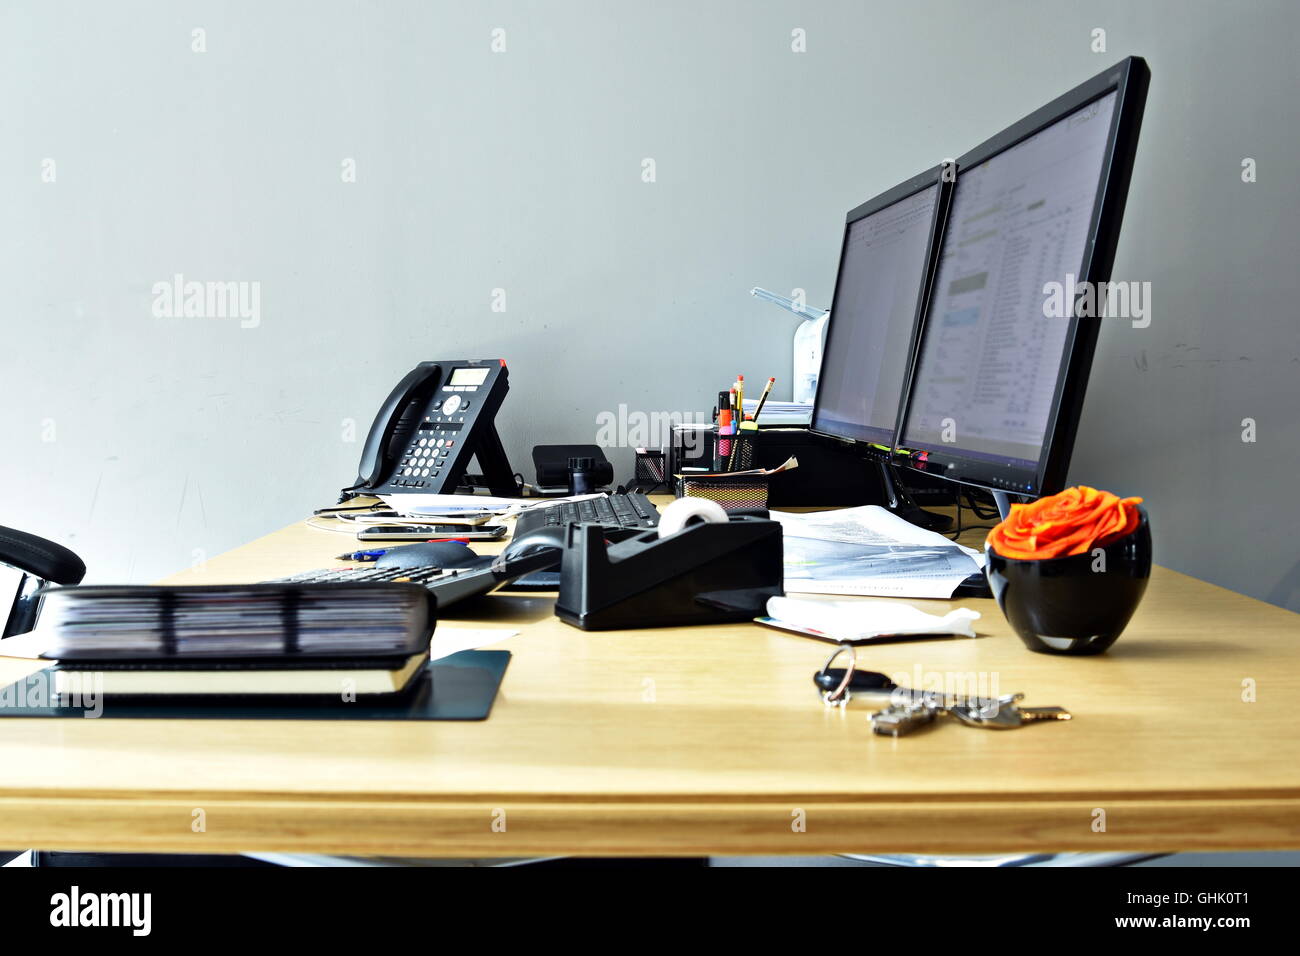 Desktop with office stuff Stock Photo by ©georgejmclittle 158442142